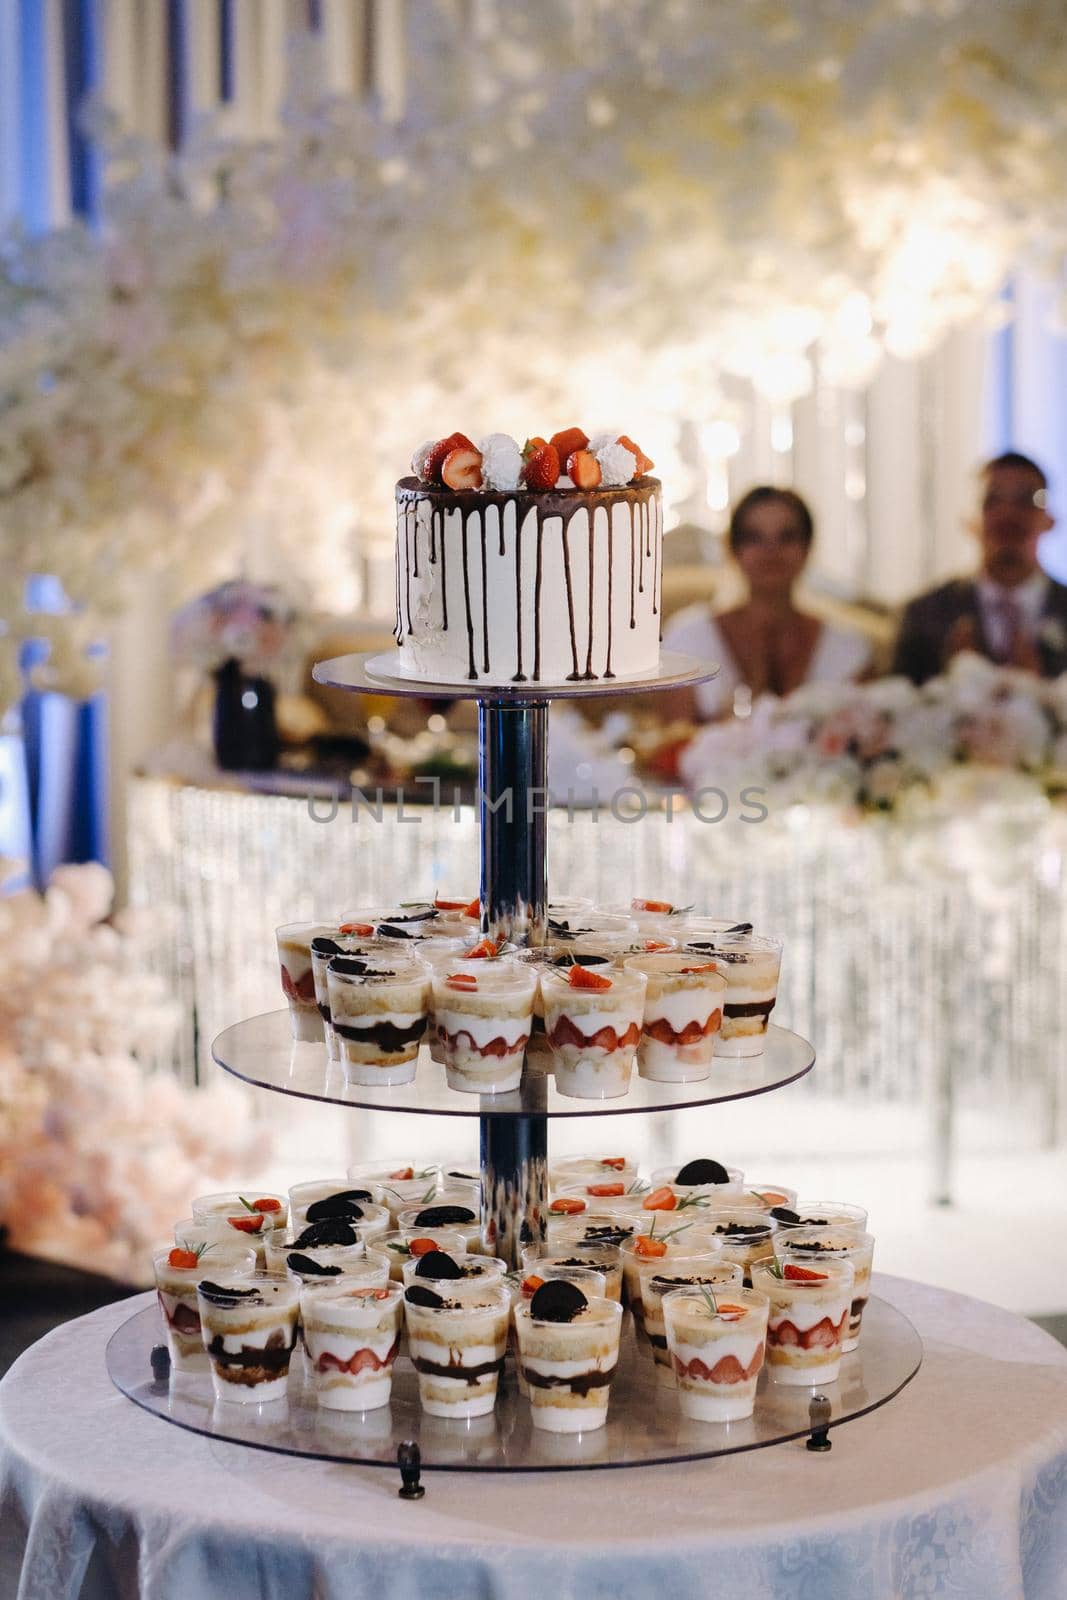 Cake and cakes on a stand at a wedding by Lobachad